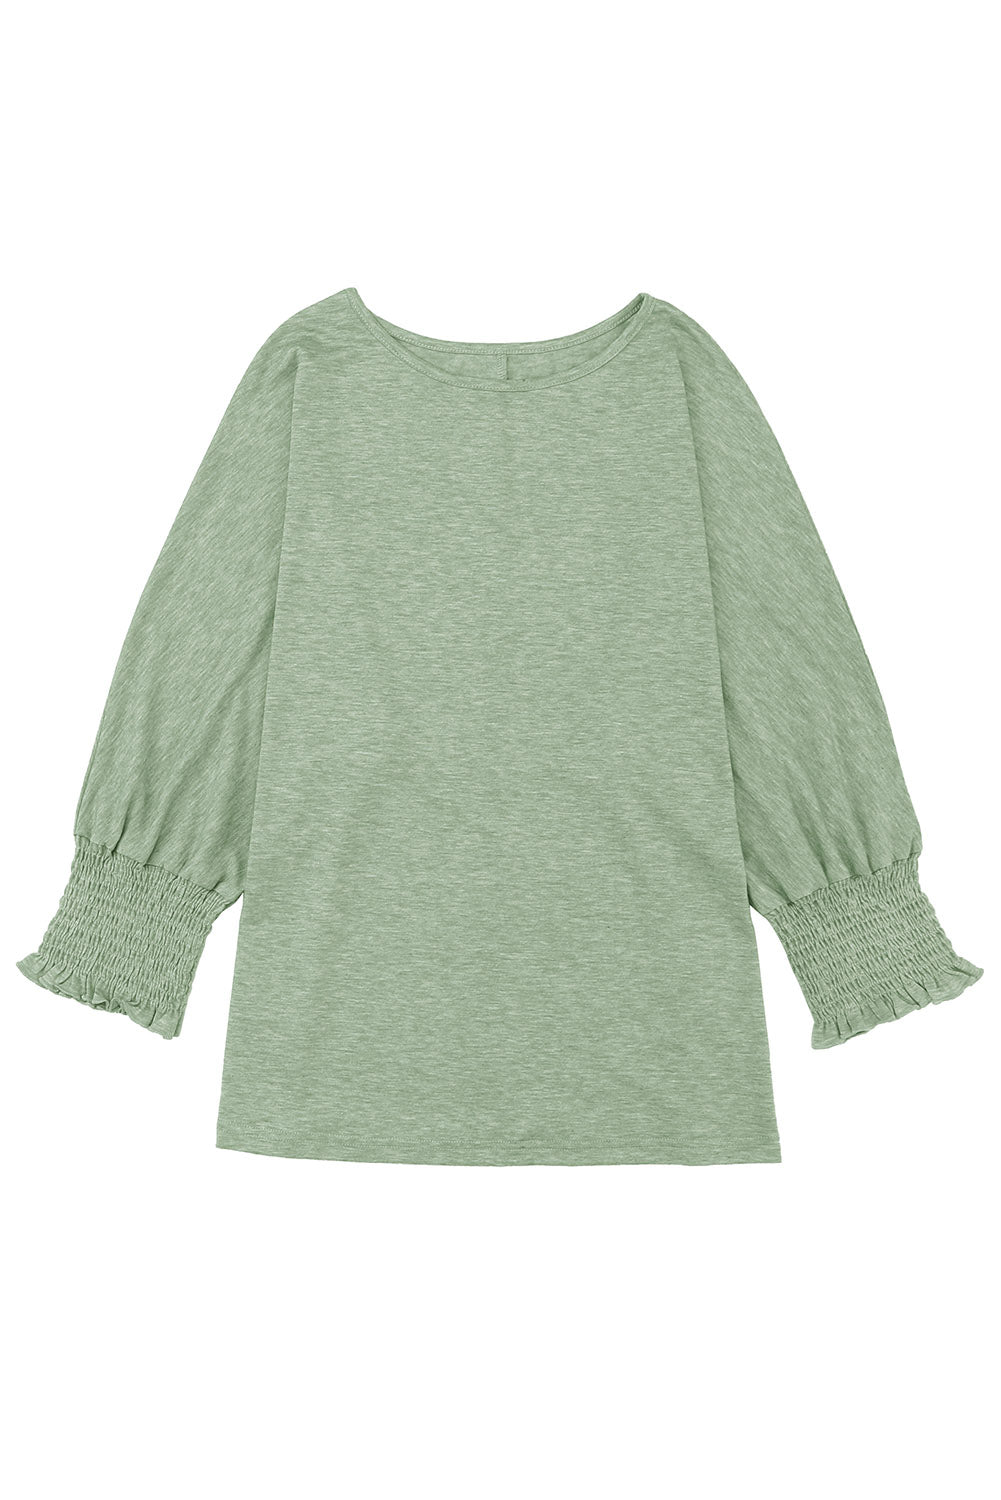 Dani Smocked 3/4 Sleeve Casual Loose Top - The Gold Cactus